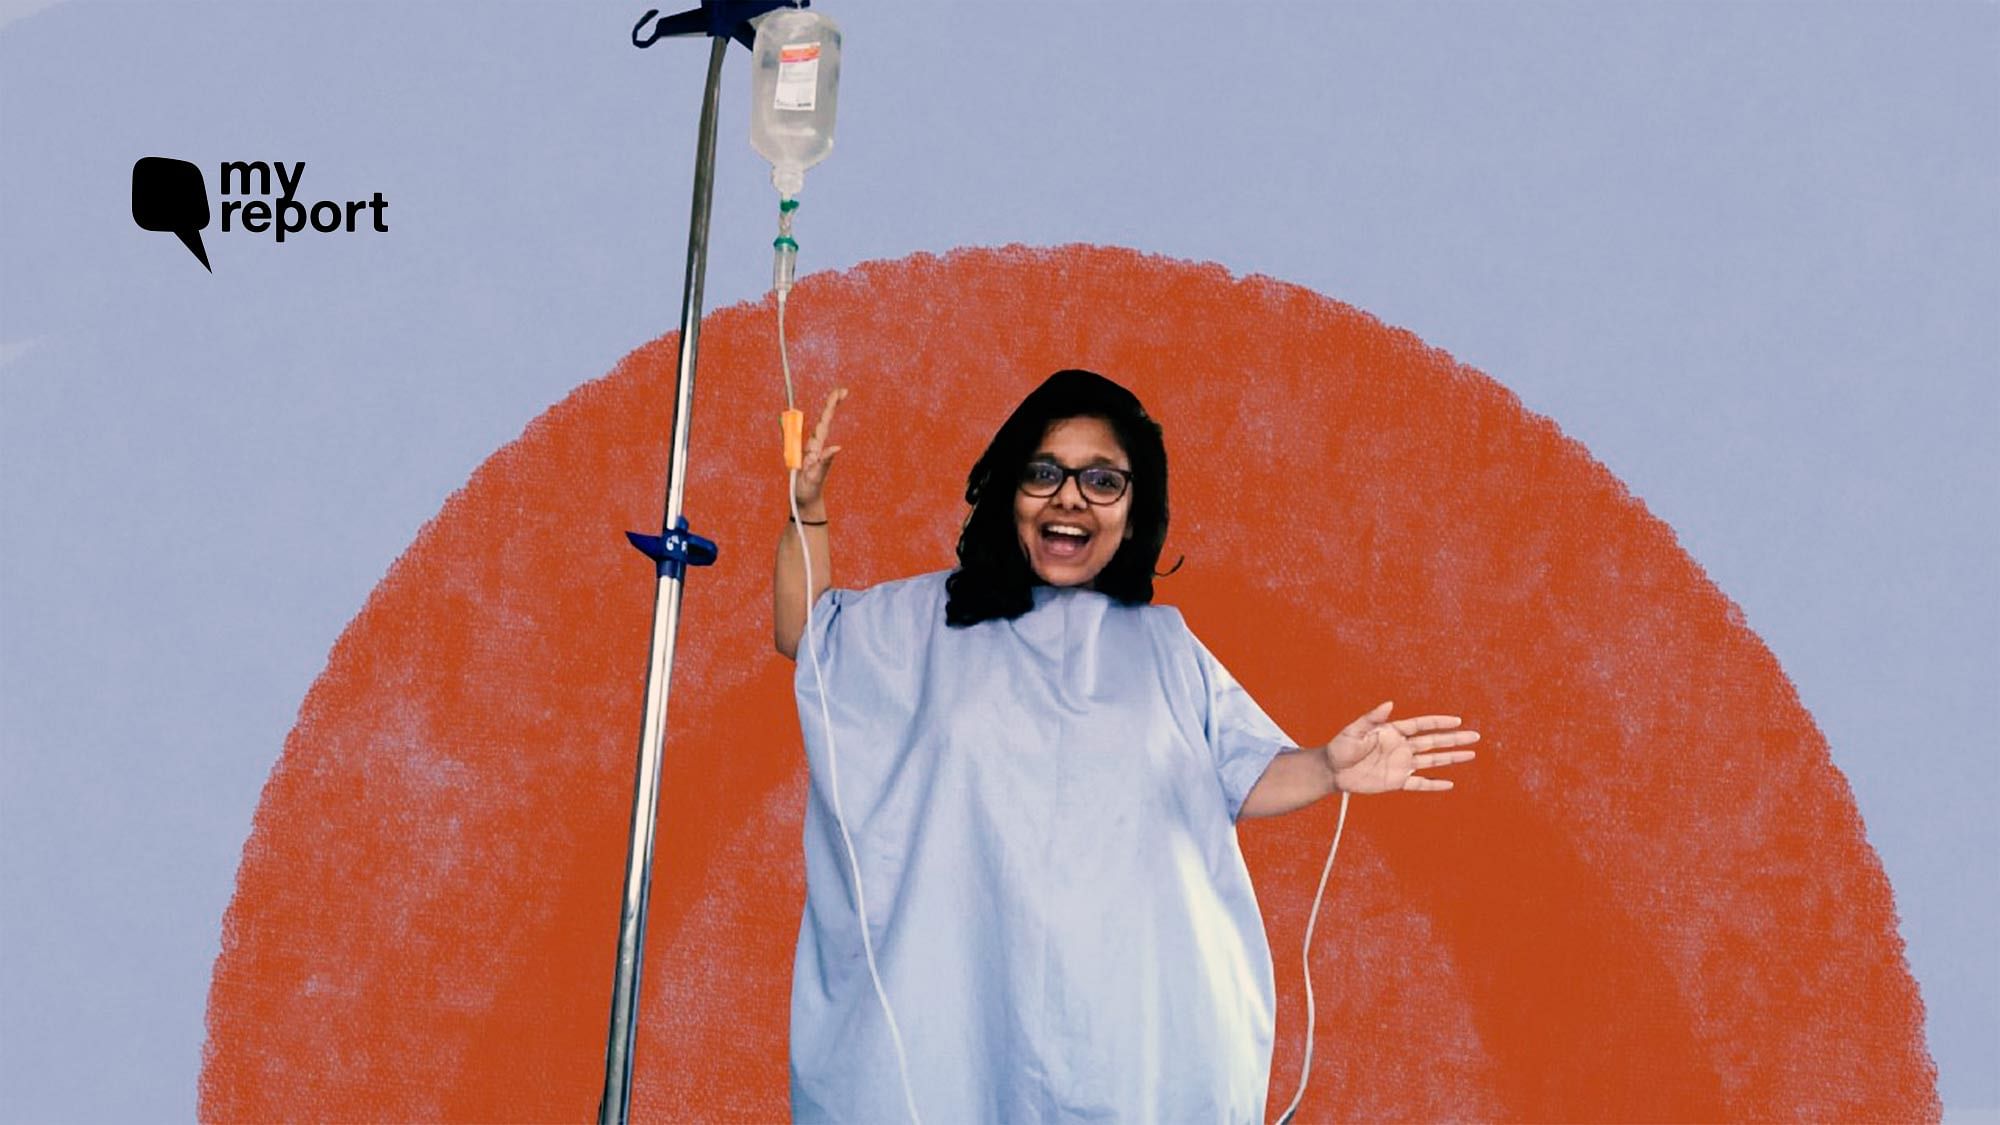 Swati is a COVID-19 survivor. This is how she got herself tested and hospitalised in Kolkata.